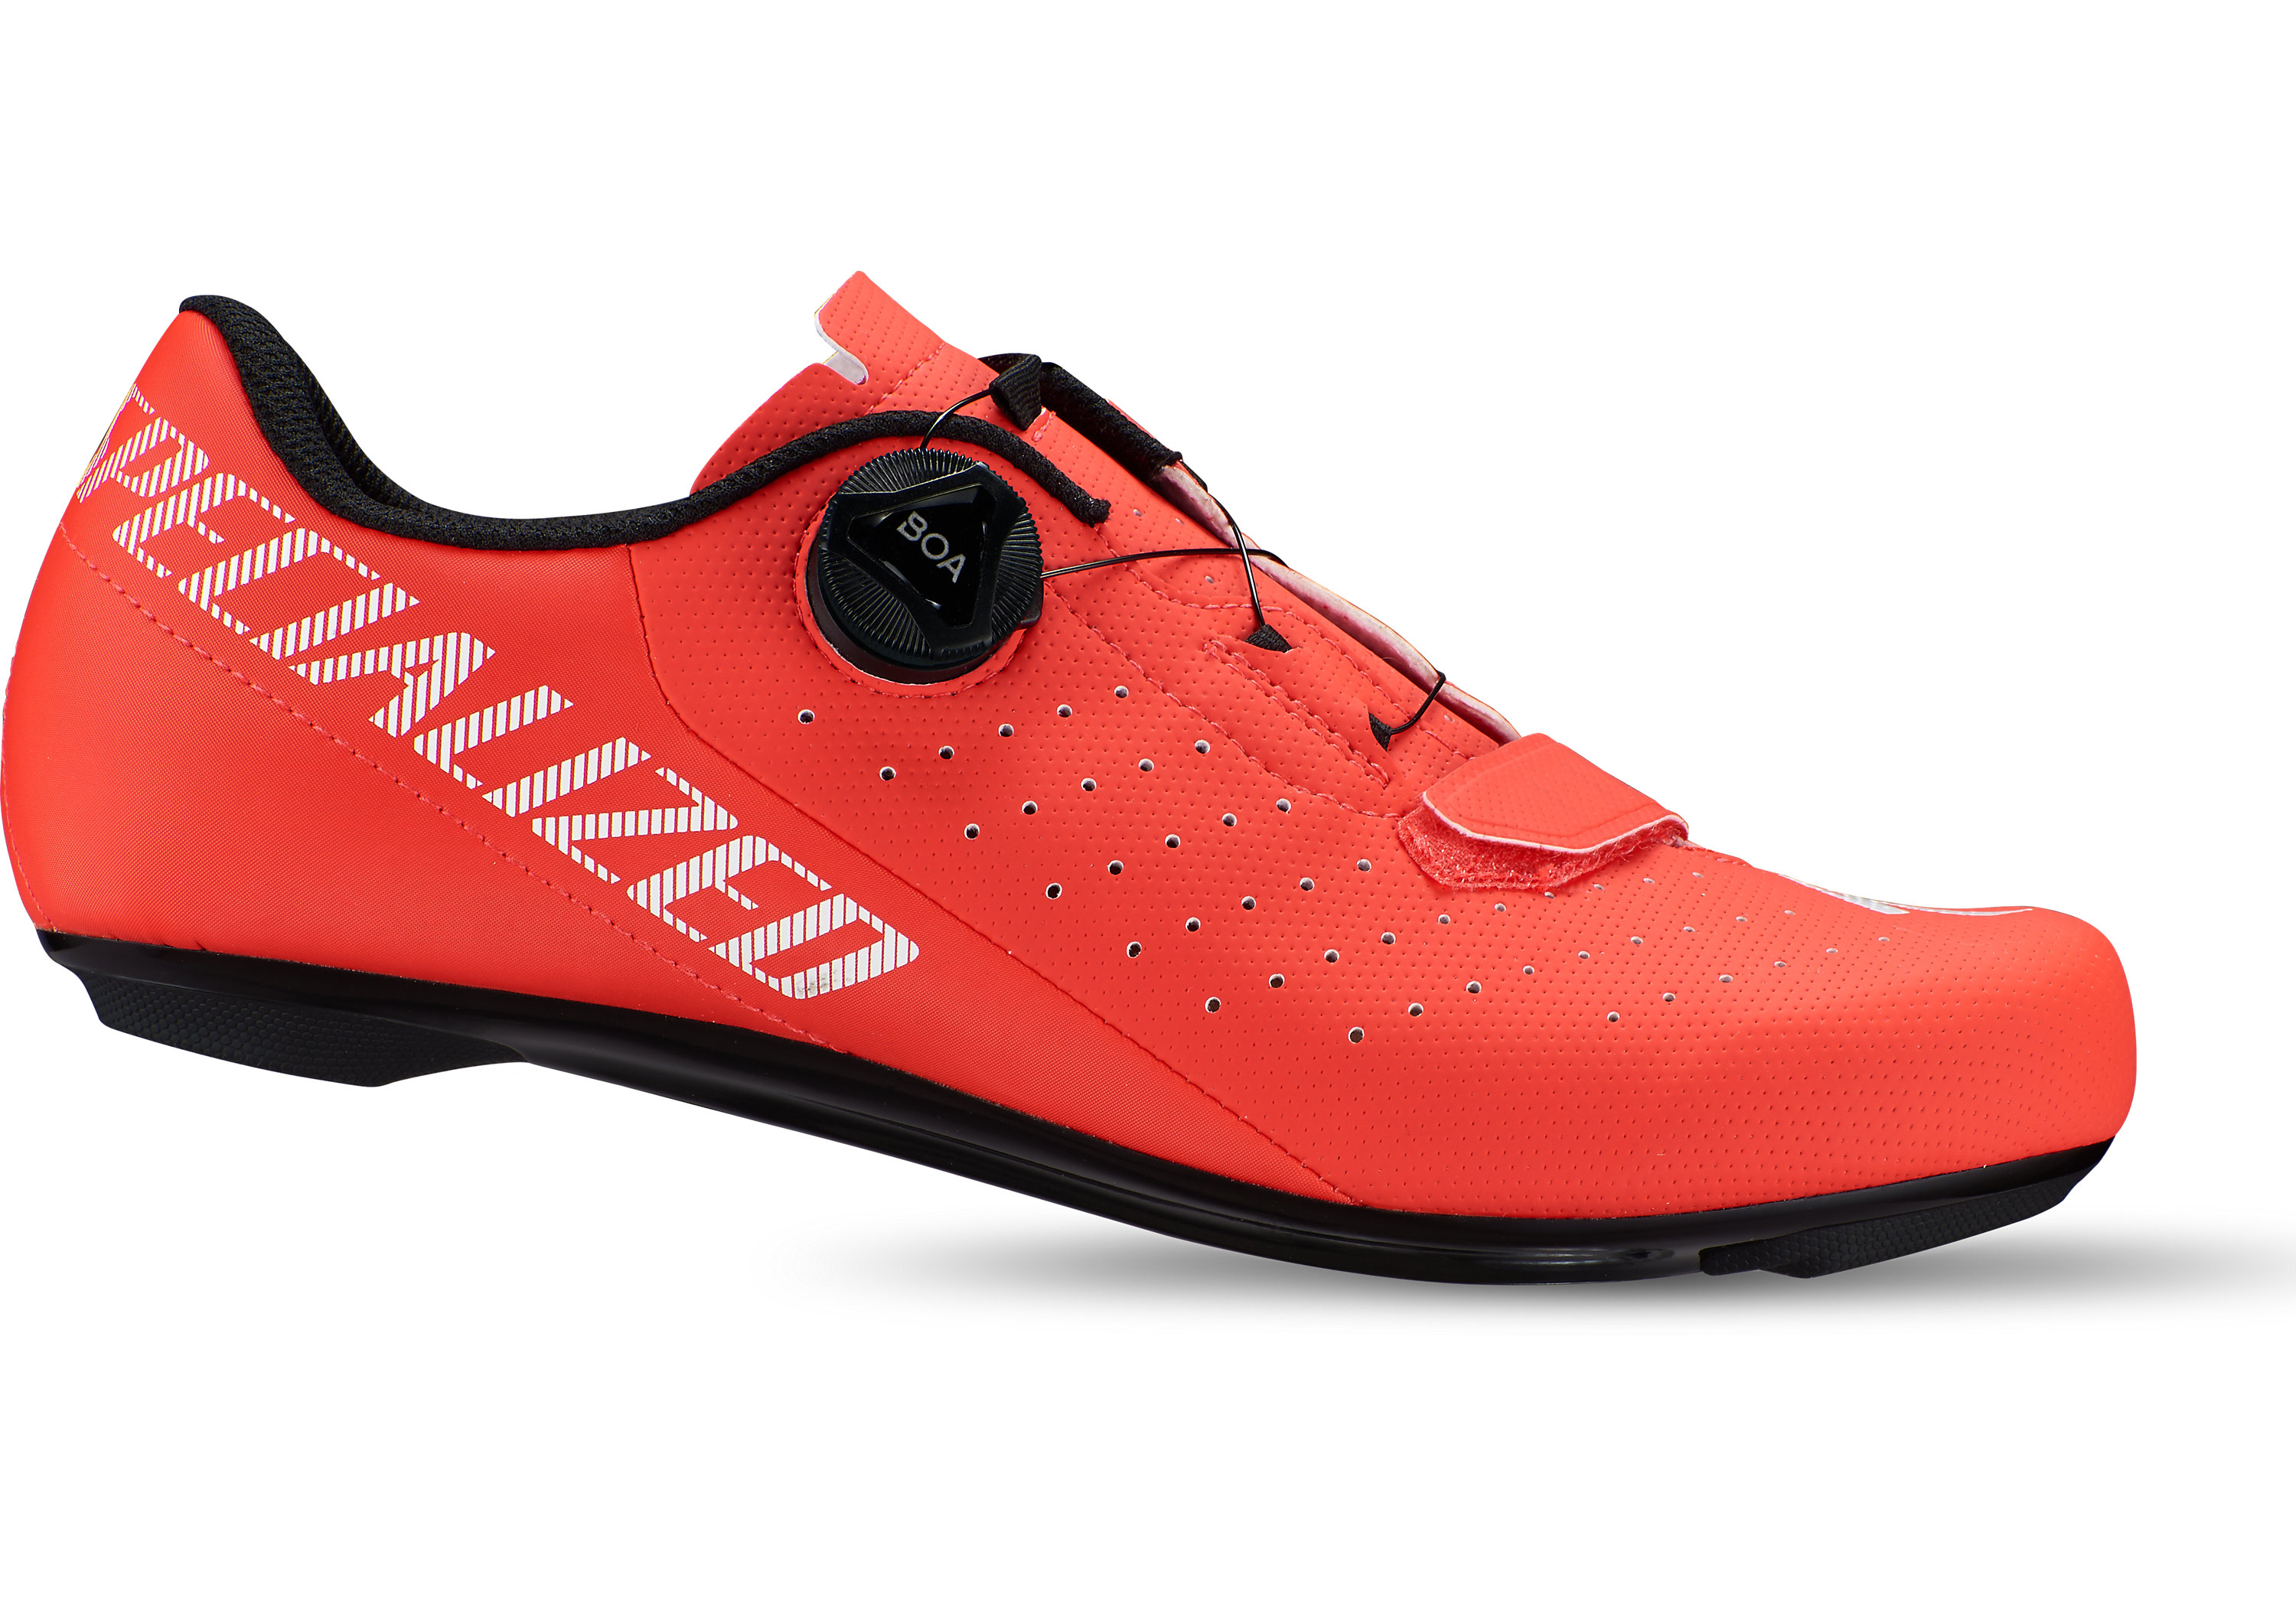 Велообувь Specialized TORCH 1.0 RD SHOE RKTRED 45 2020 61020-5445